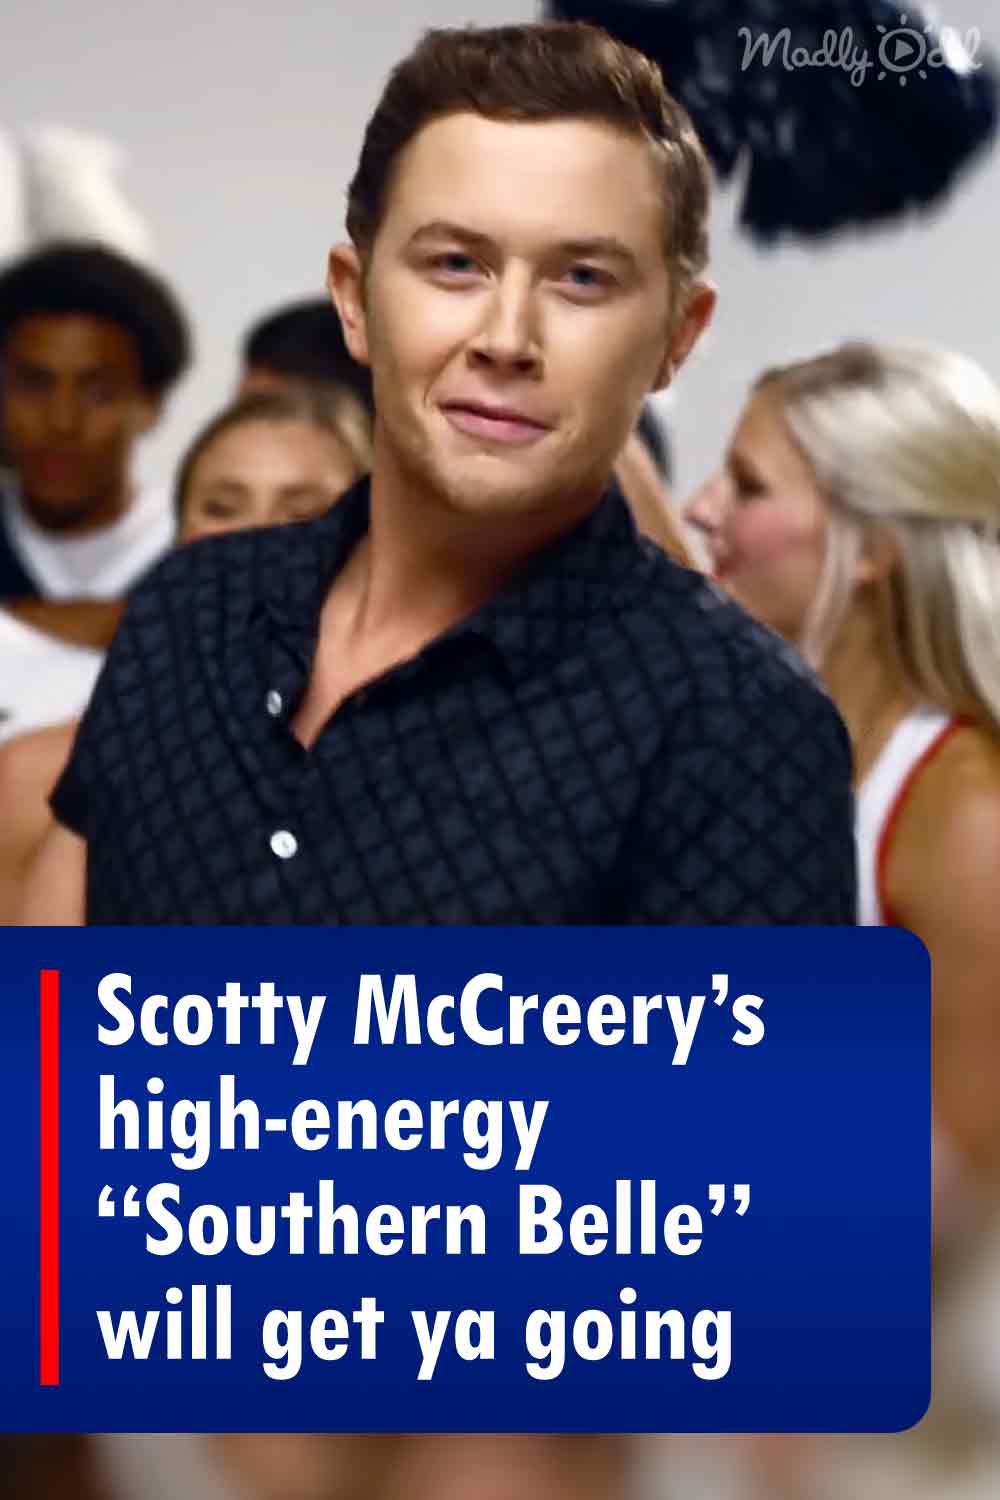 Scotty McCreery’s high-energy “Southern Belle” will get ya going